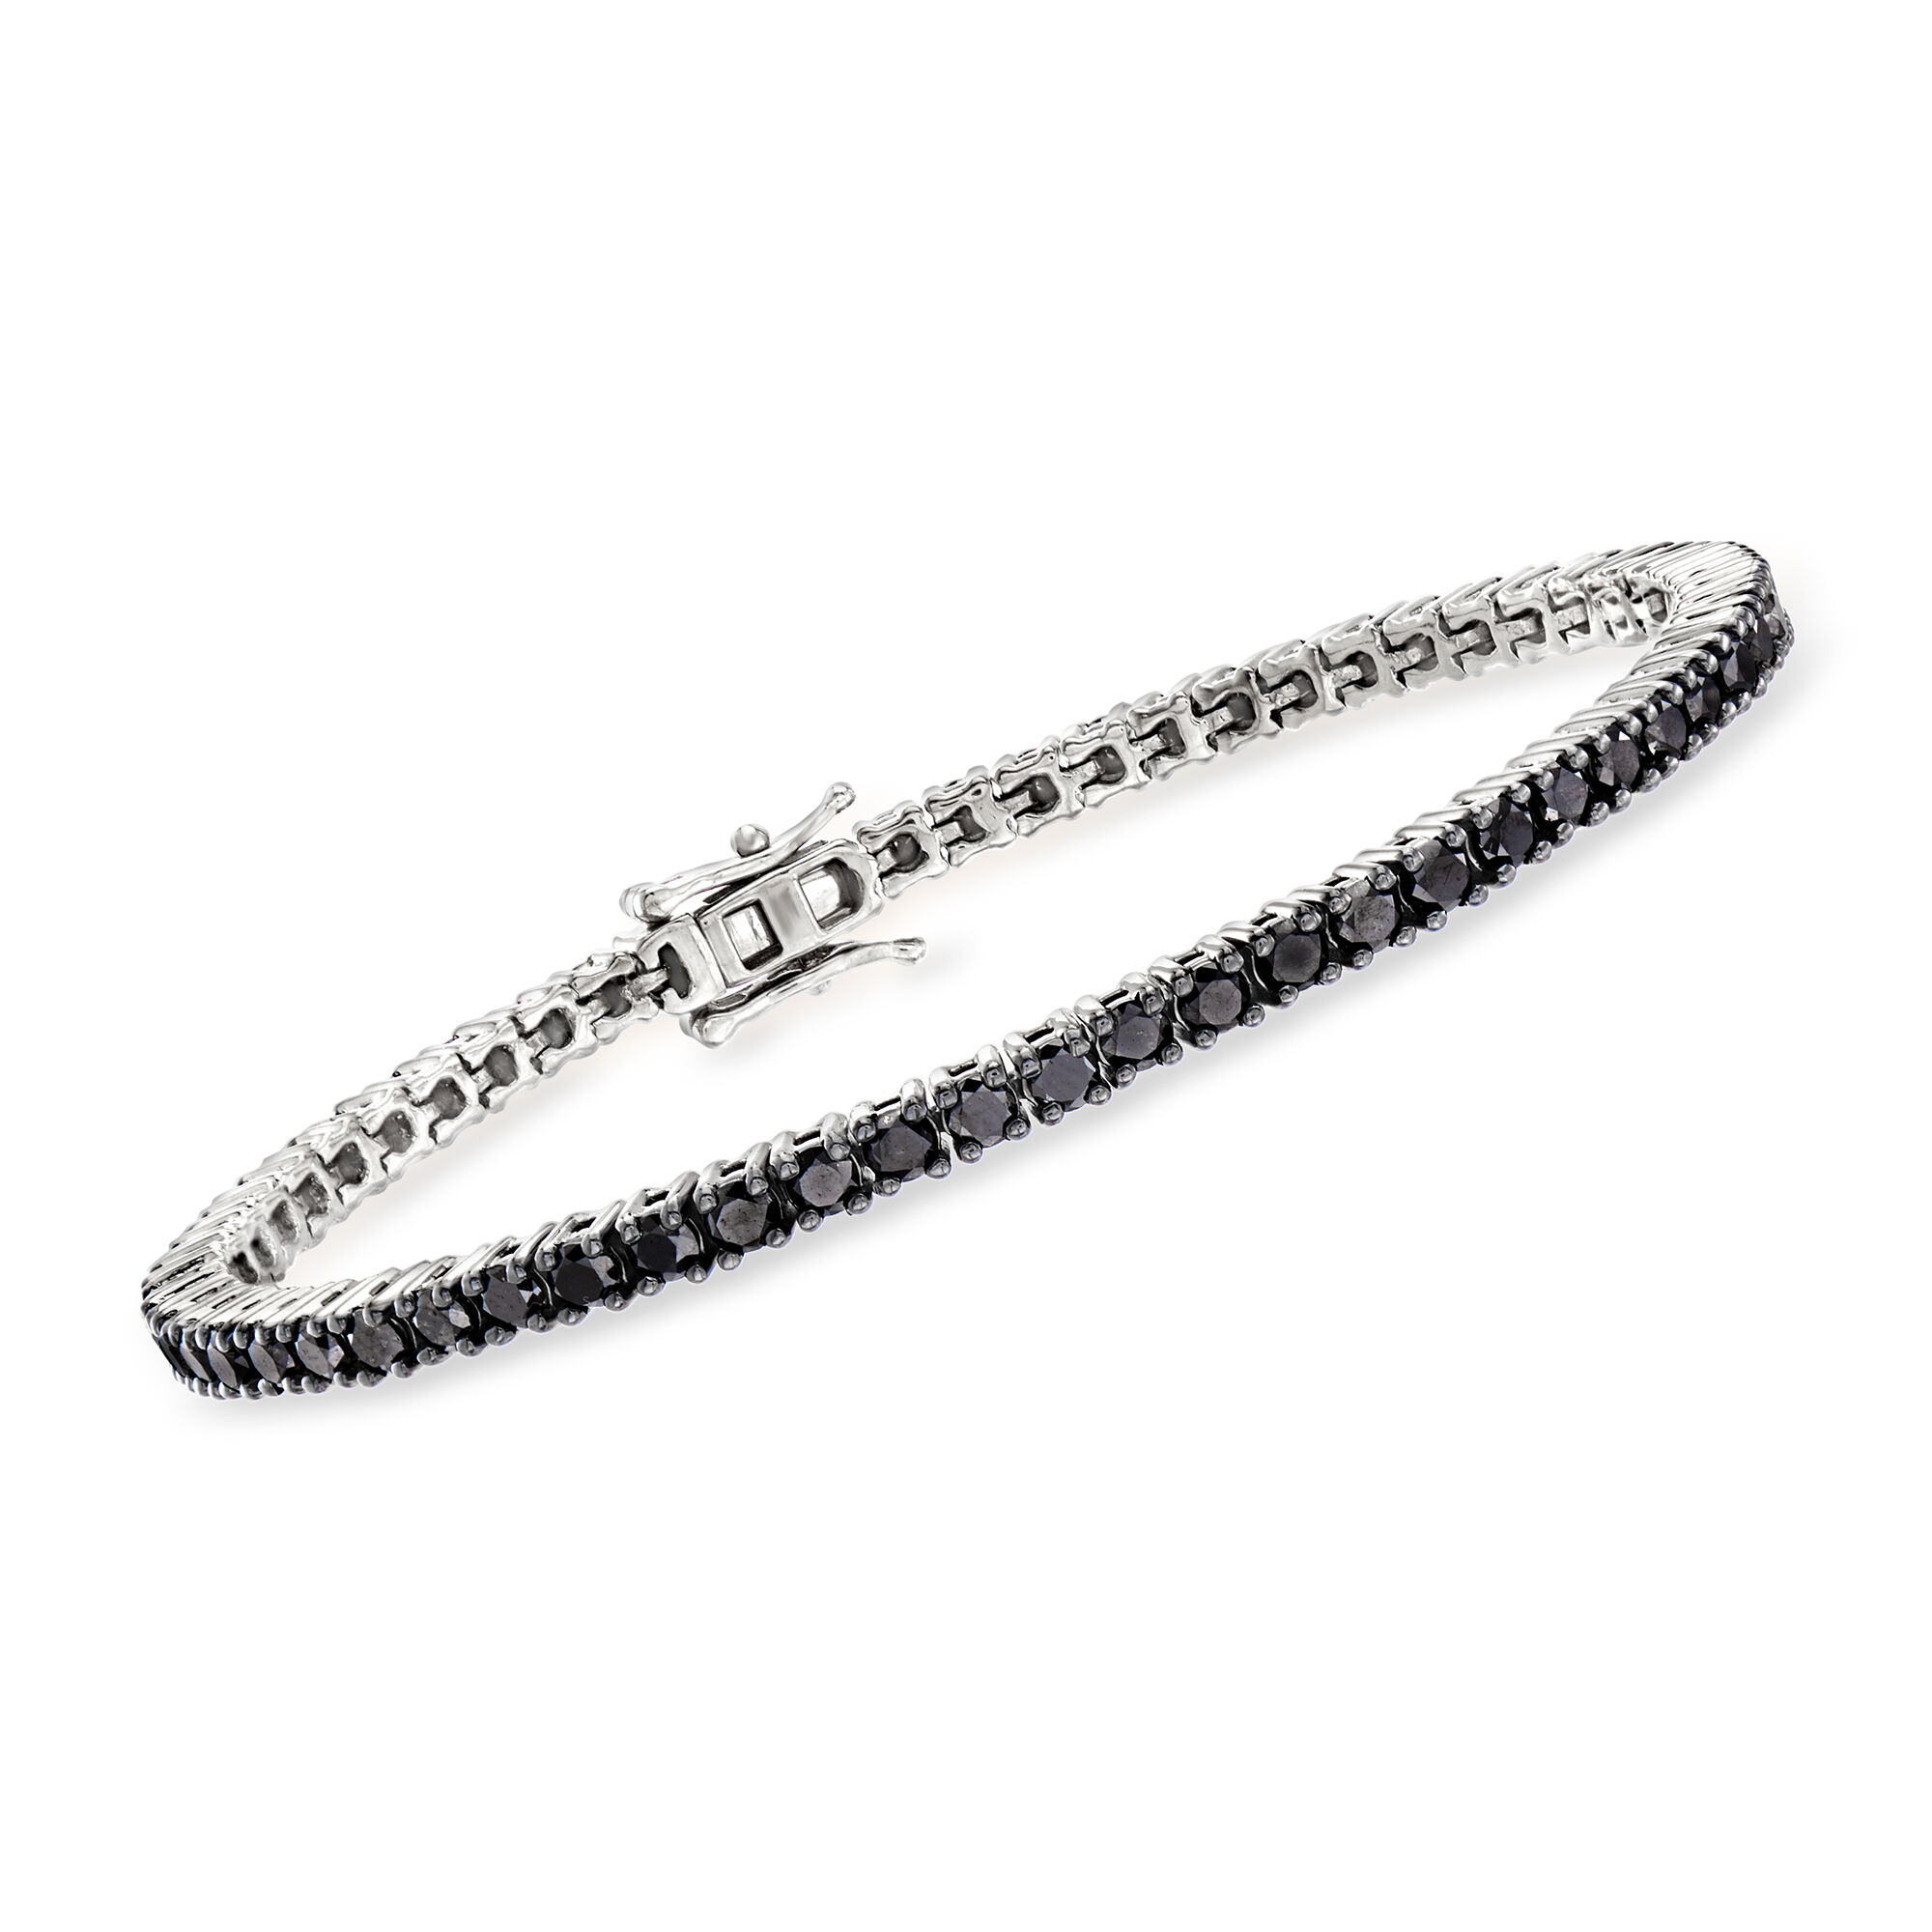 La4ve Diamonds 1/2 Carat Diamond Fashion Tennis Bracelet for Women in Sterling Silver with Secure Clasp with Gift Box Included